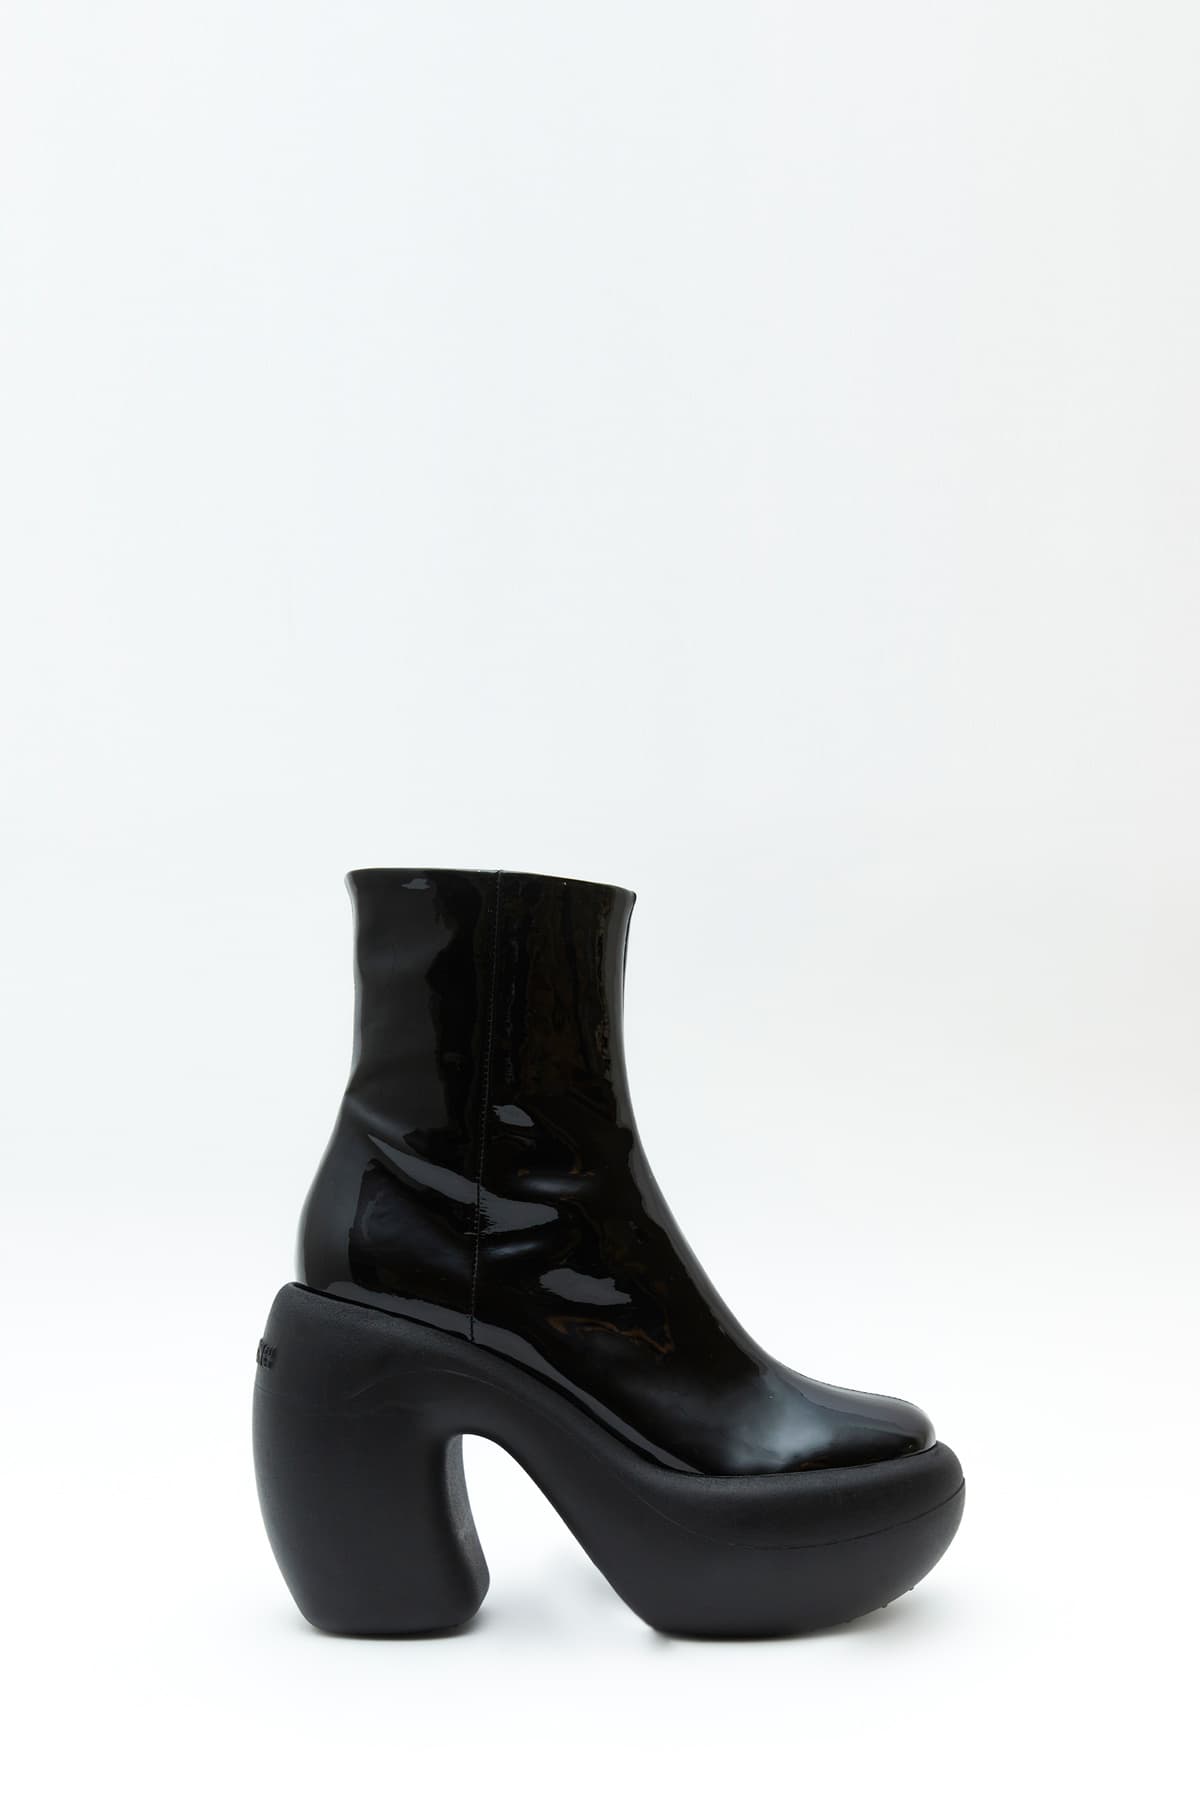 Sideview of Honey Bubble ankle boot in black from the Haus of Honey fall-winter 2023-24